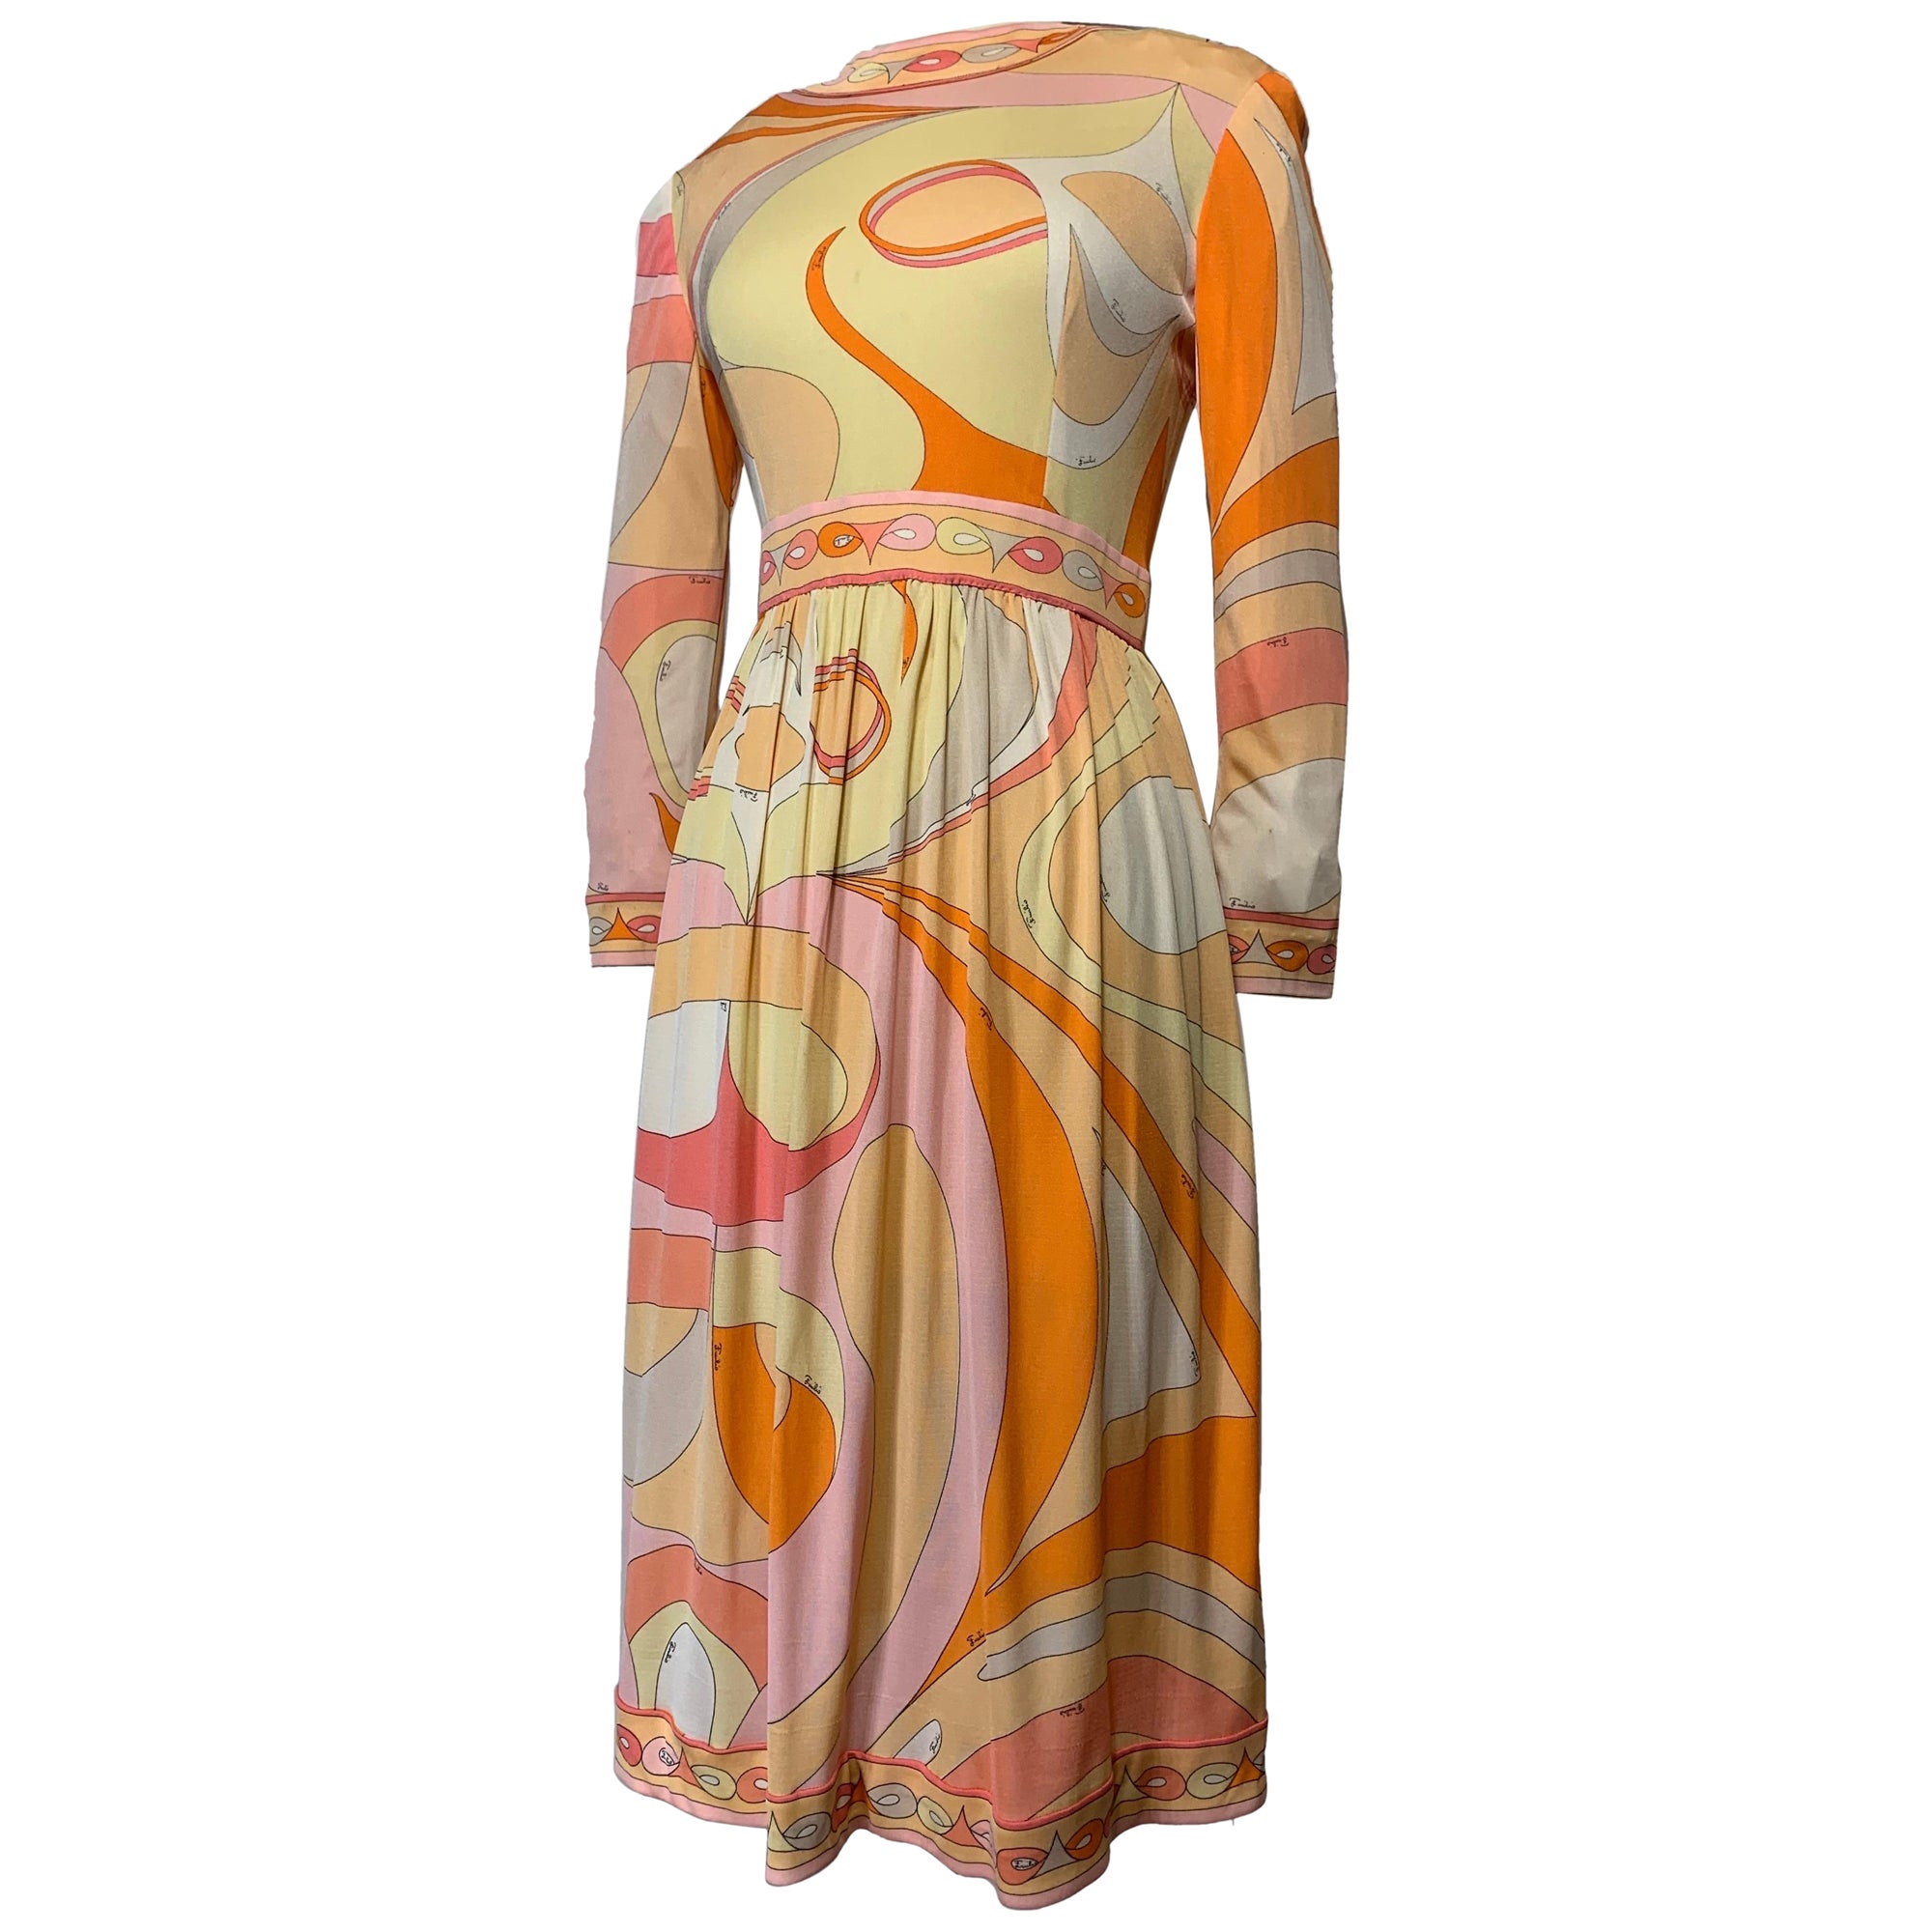 1960er Emilio Pucci Psychedelic Print Mod Day Dress w Full Skirt in Tangerine  im Angebot